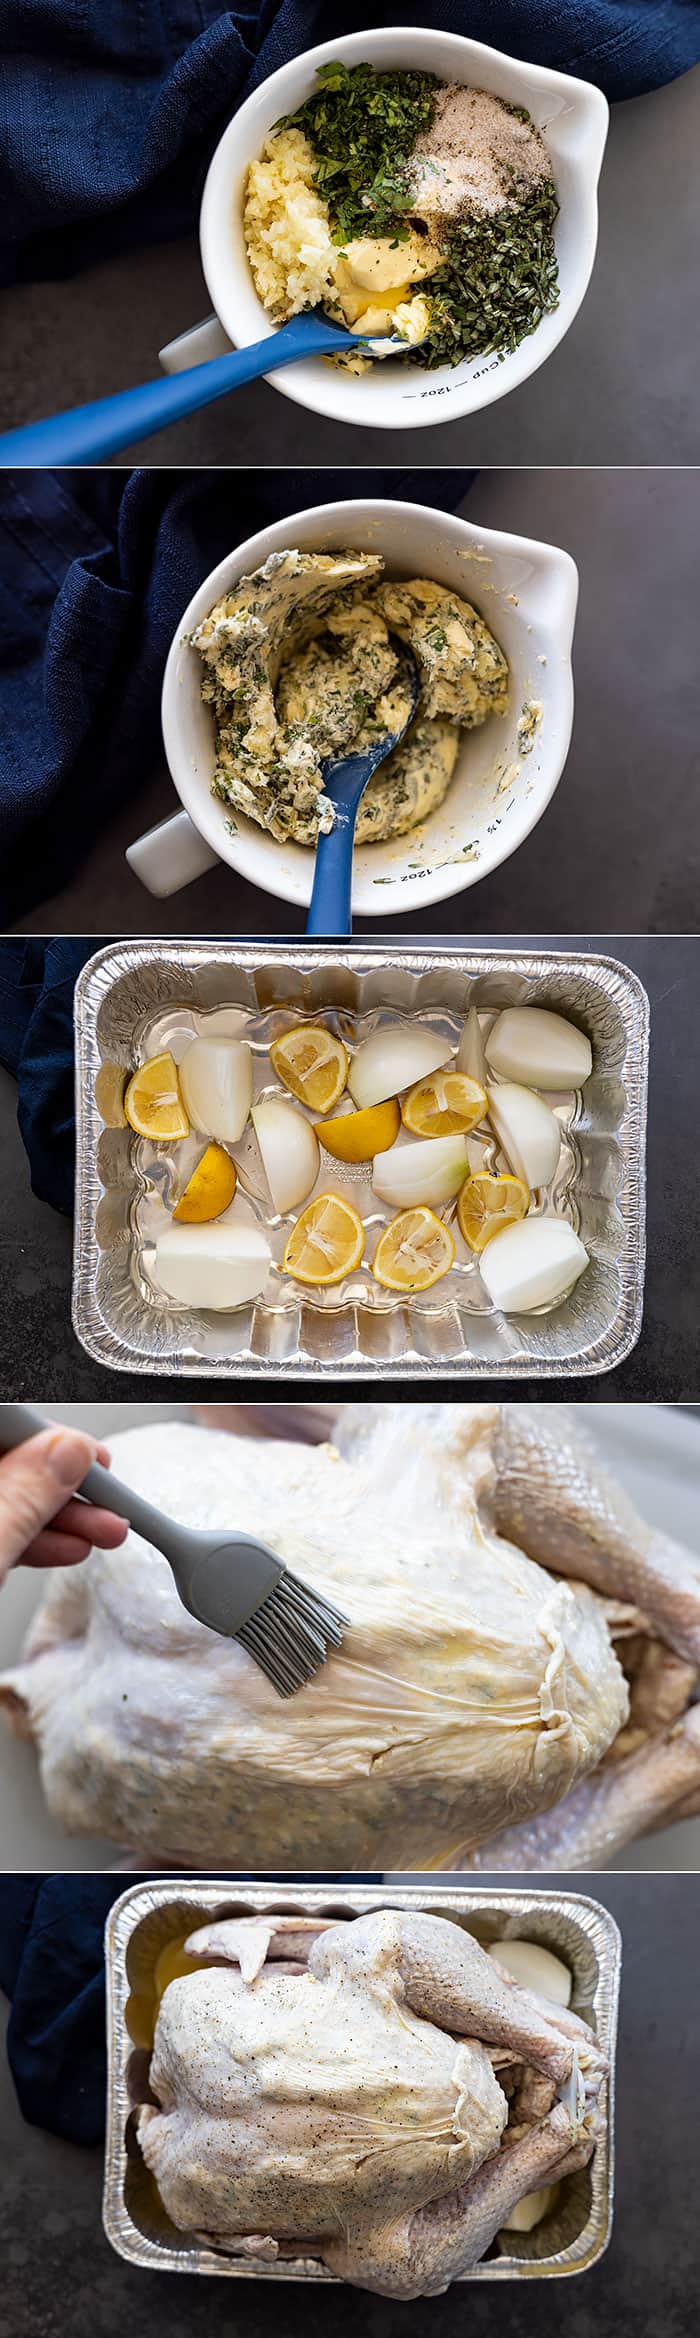 Five pictures showing the steps to preparing the turkey to go into the oven.